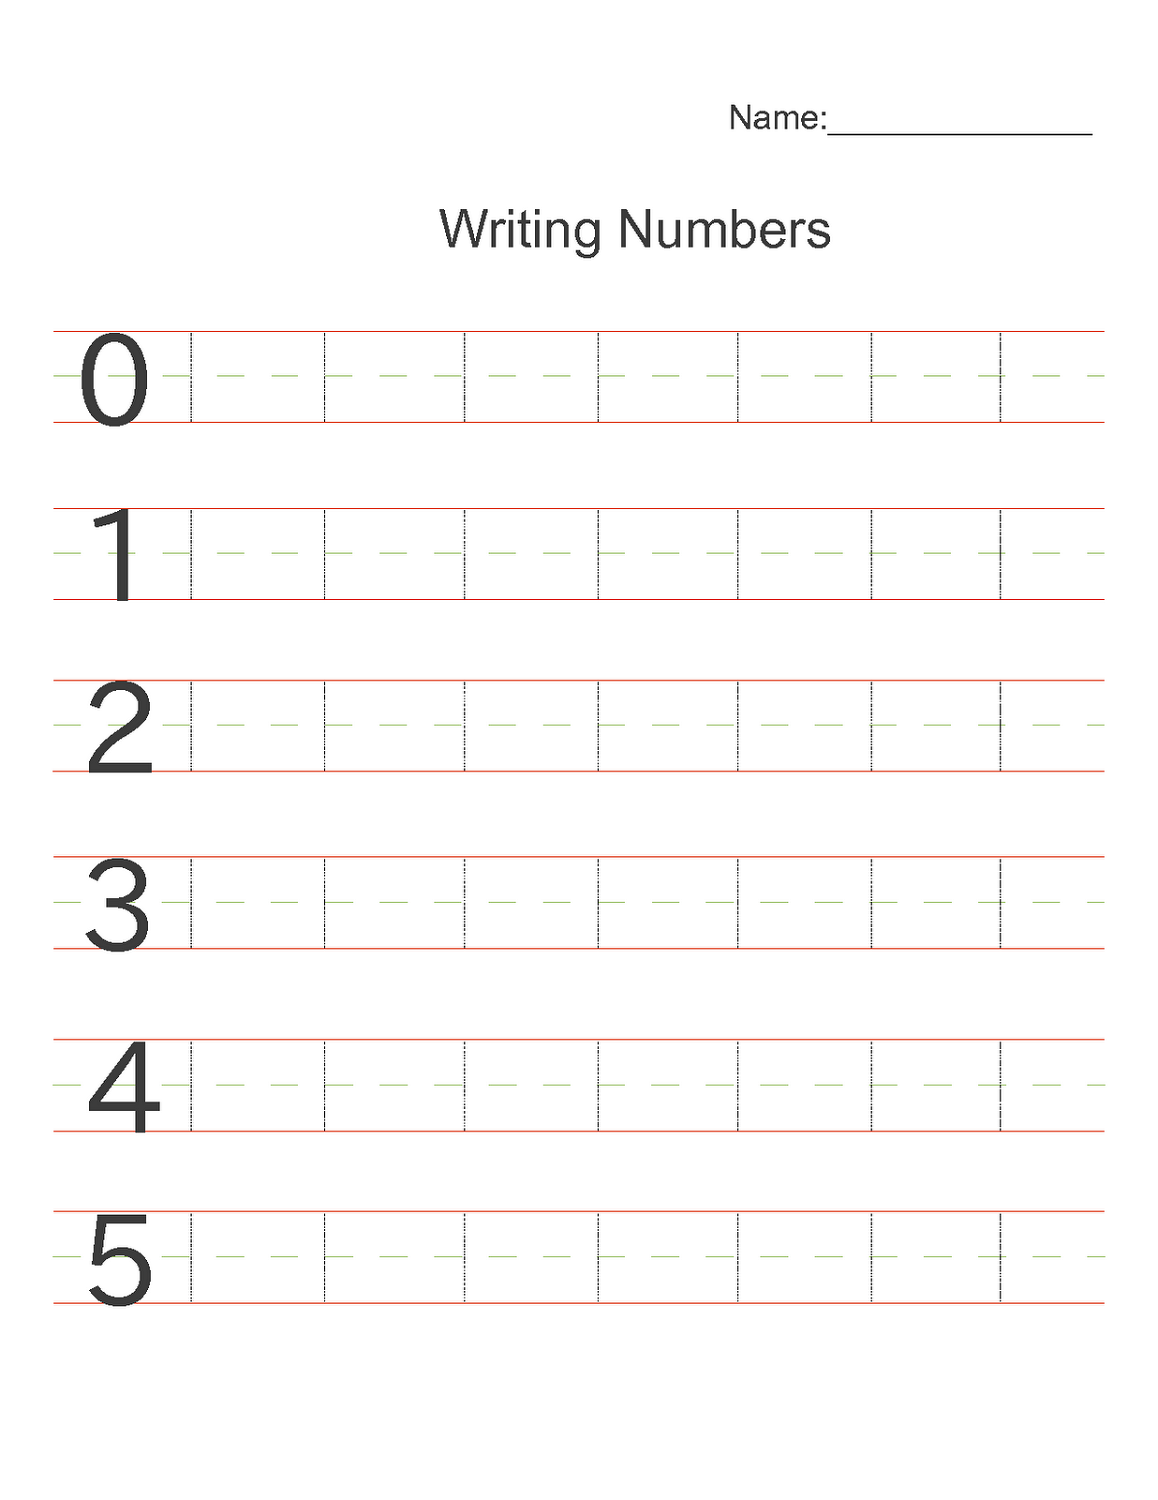 Kindergarten Number Writing Worksheets Confessions Of A Homeschooler Writing Numbers 